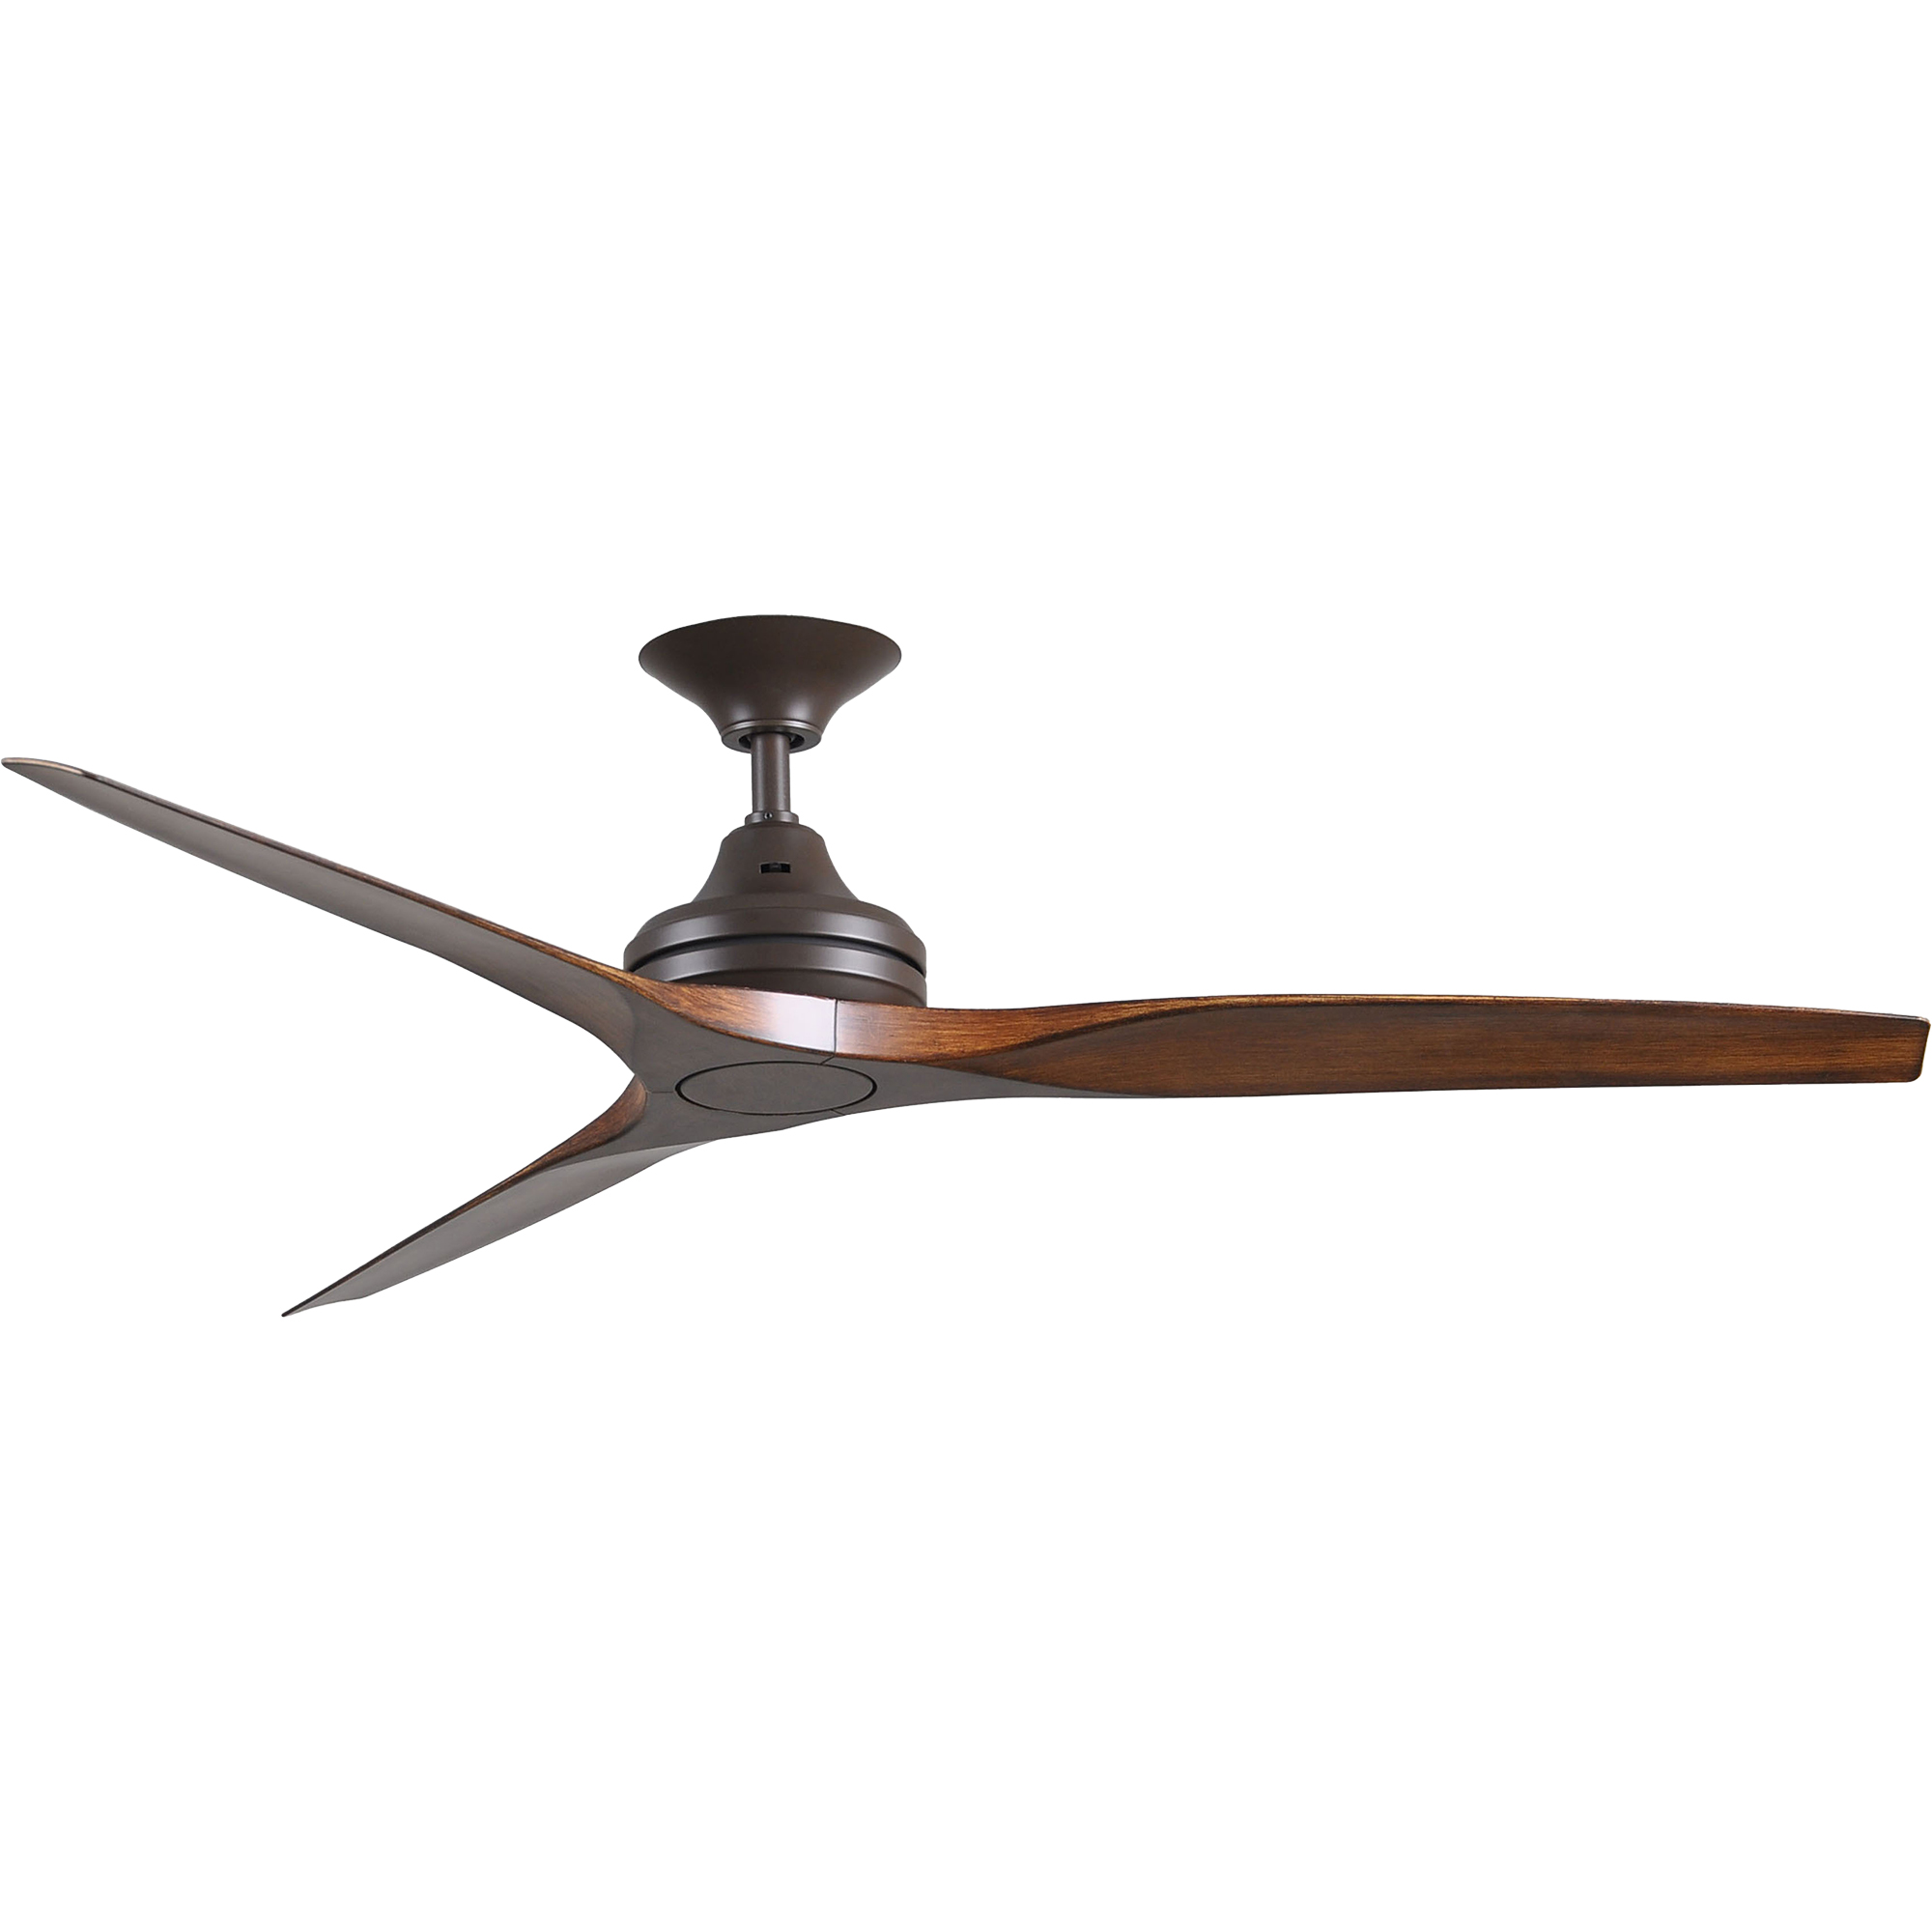 60" Spitfire in Oil-rubbed Bronze with Koa polymer blades